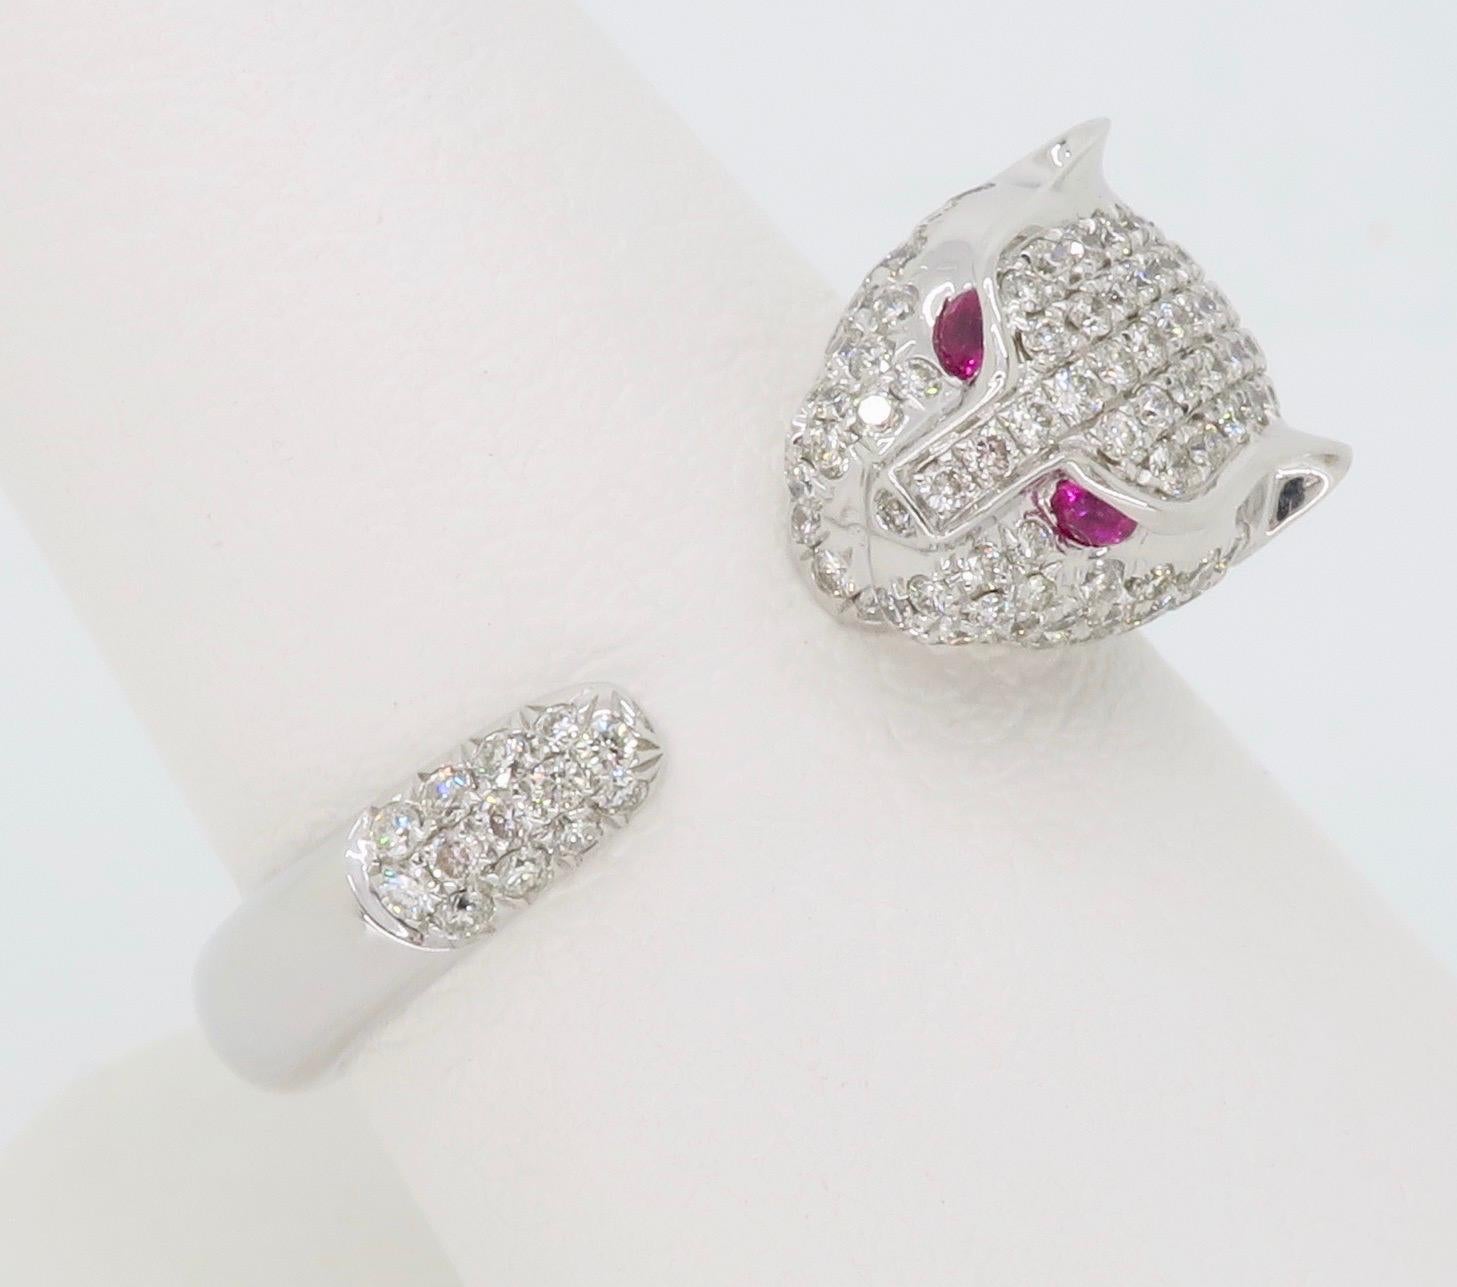 Panther Diamond and Ruby Ring Made in 18 Karat White Gold 4